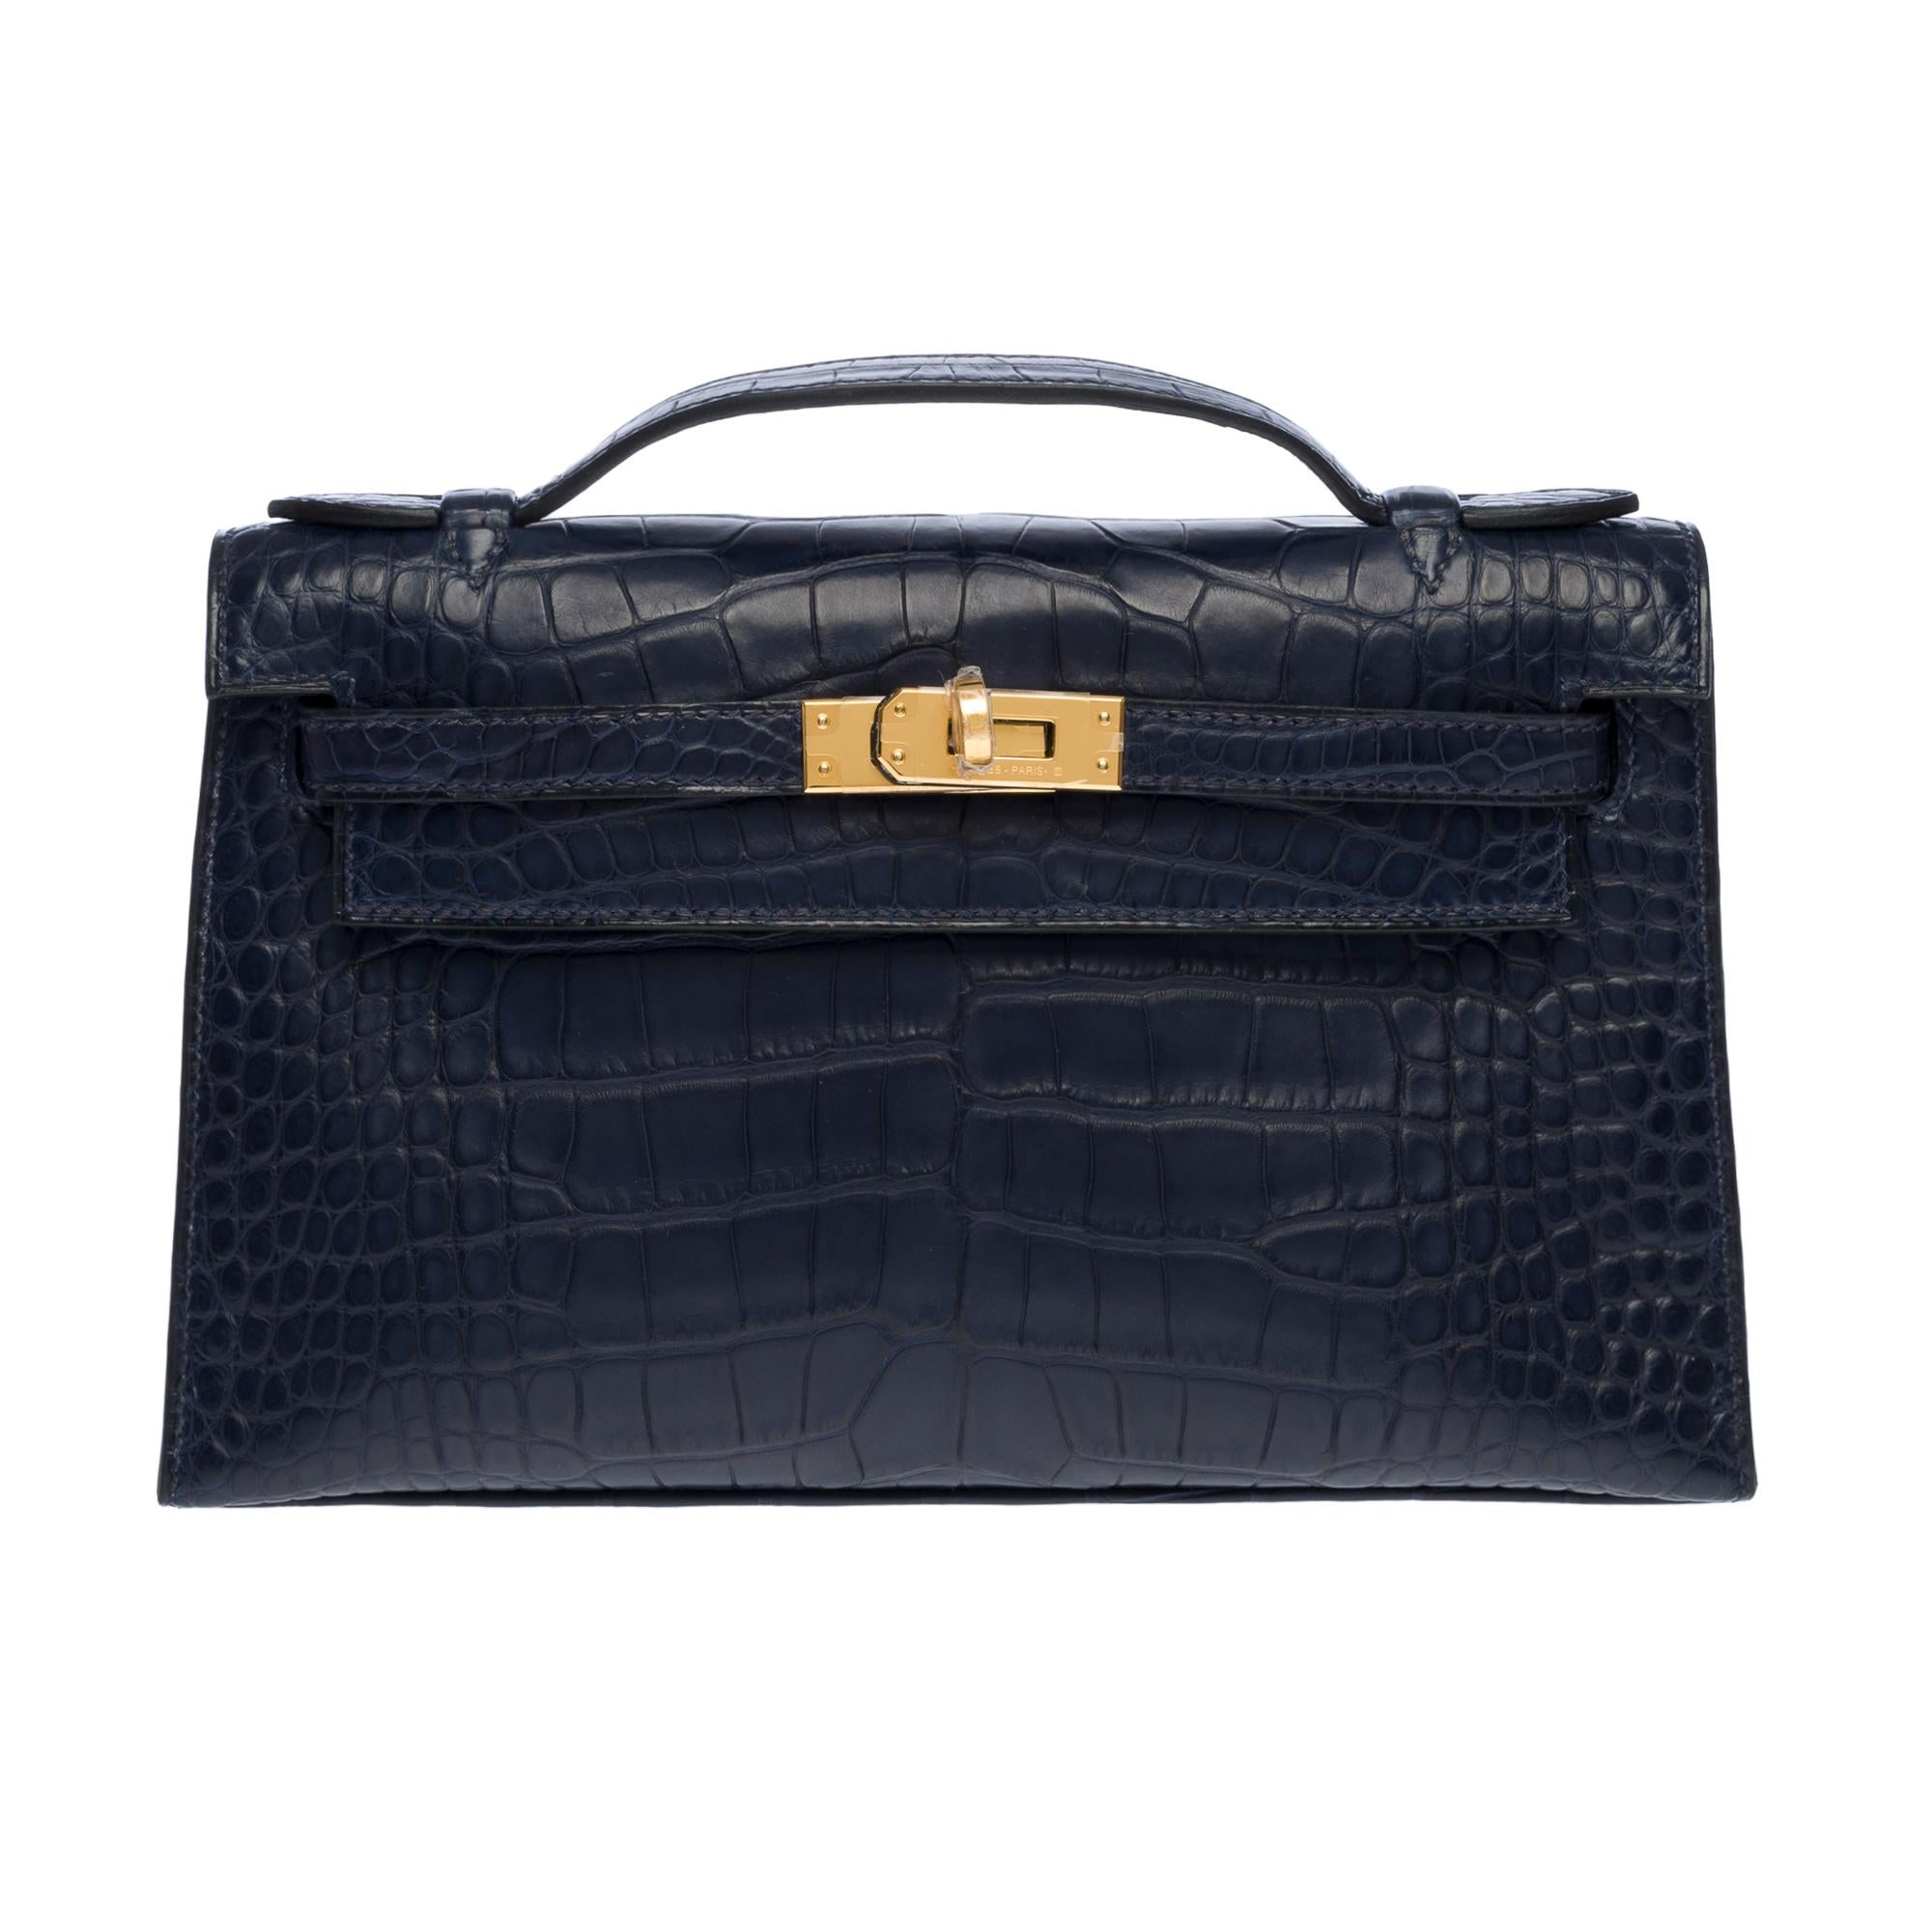 Rare & Exceptional Pochette Hermès Kelly Clutch in Blue Indigo matte Porosus Crocodile leather, gold-plated metal hardware, Blue crocodile handle for a hand carry

Flap closure
Inner lining in blue leather, one patch pocket
Signature: 